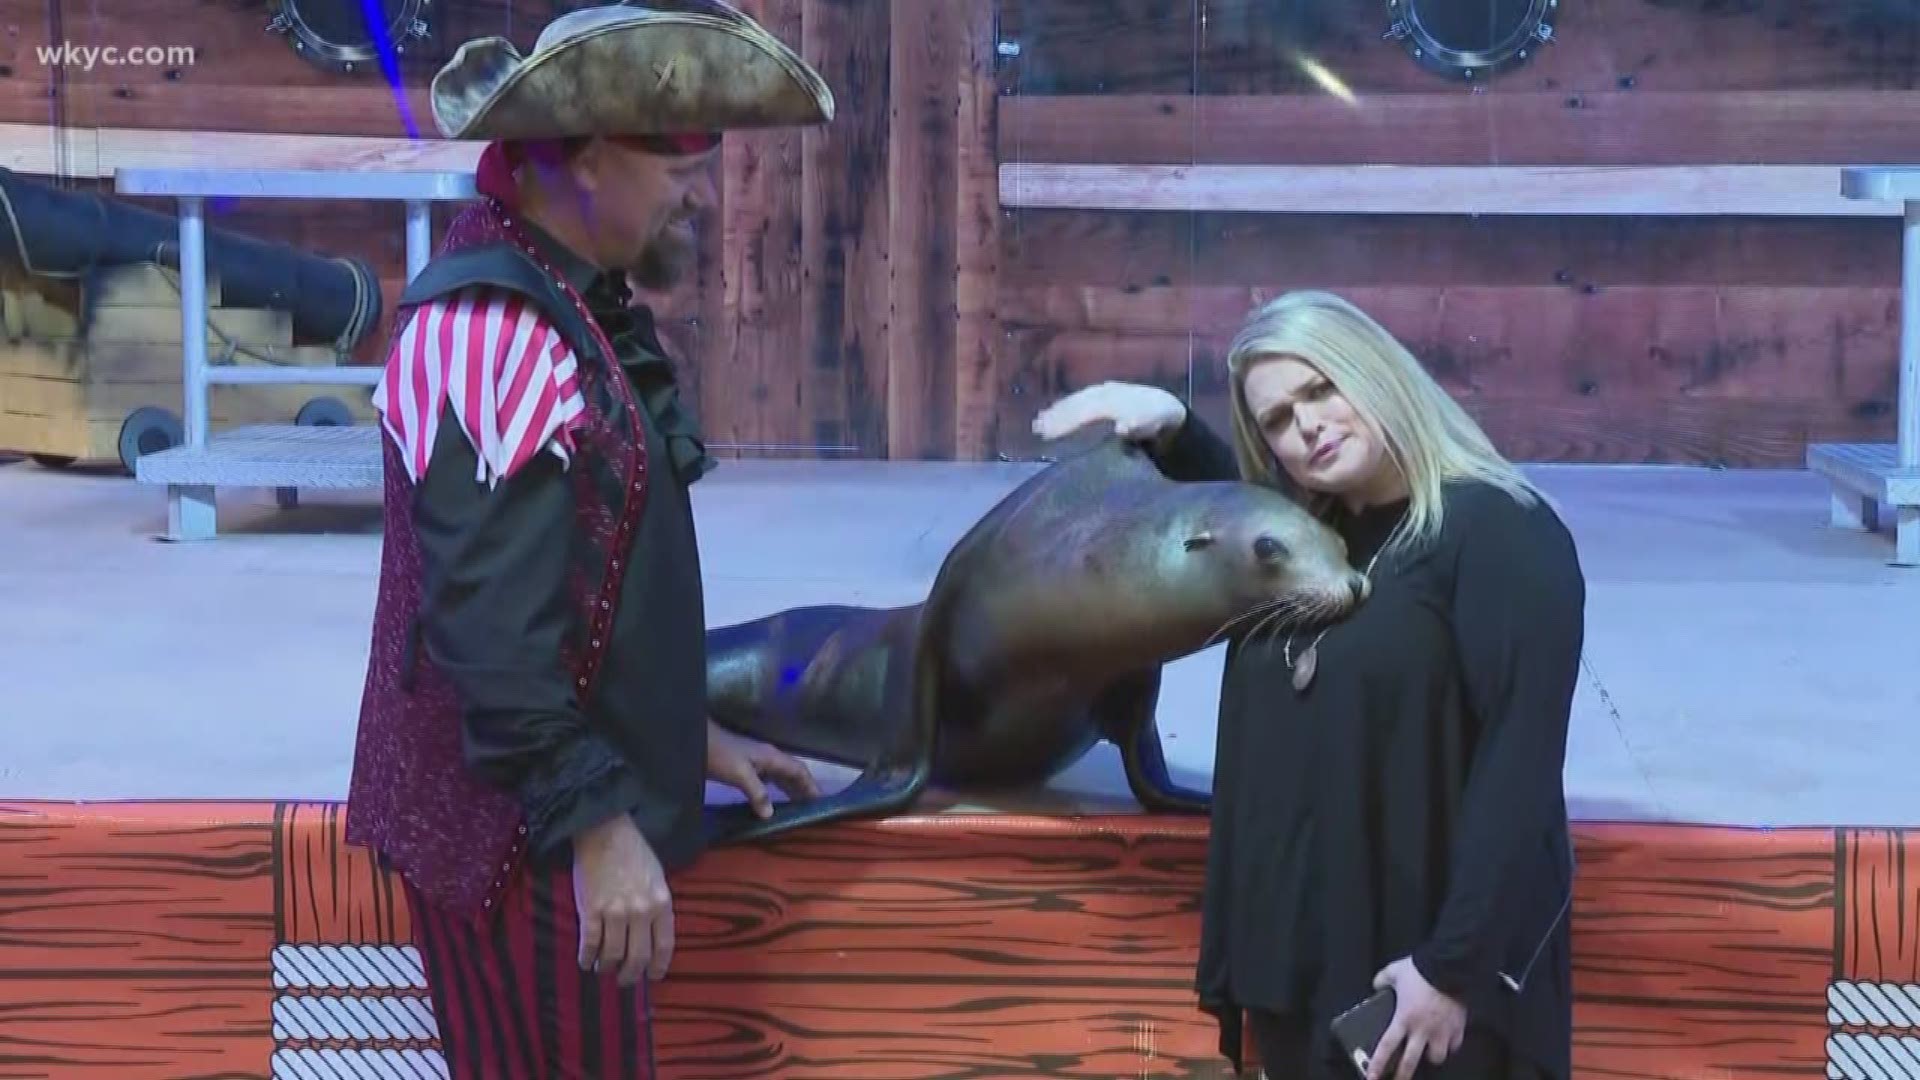 Lindsay hangs out with Captain Jimmy and Zoe the Sea Lion at the I-X Indoor Amusement Park